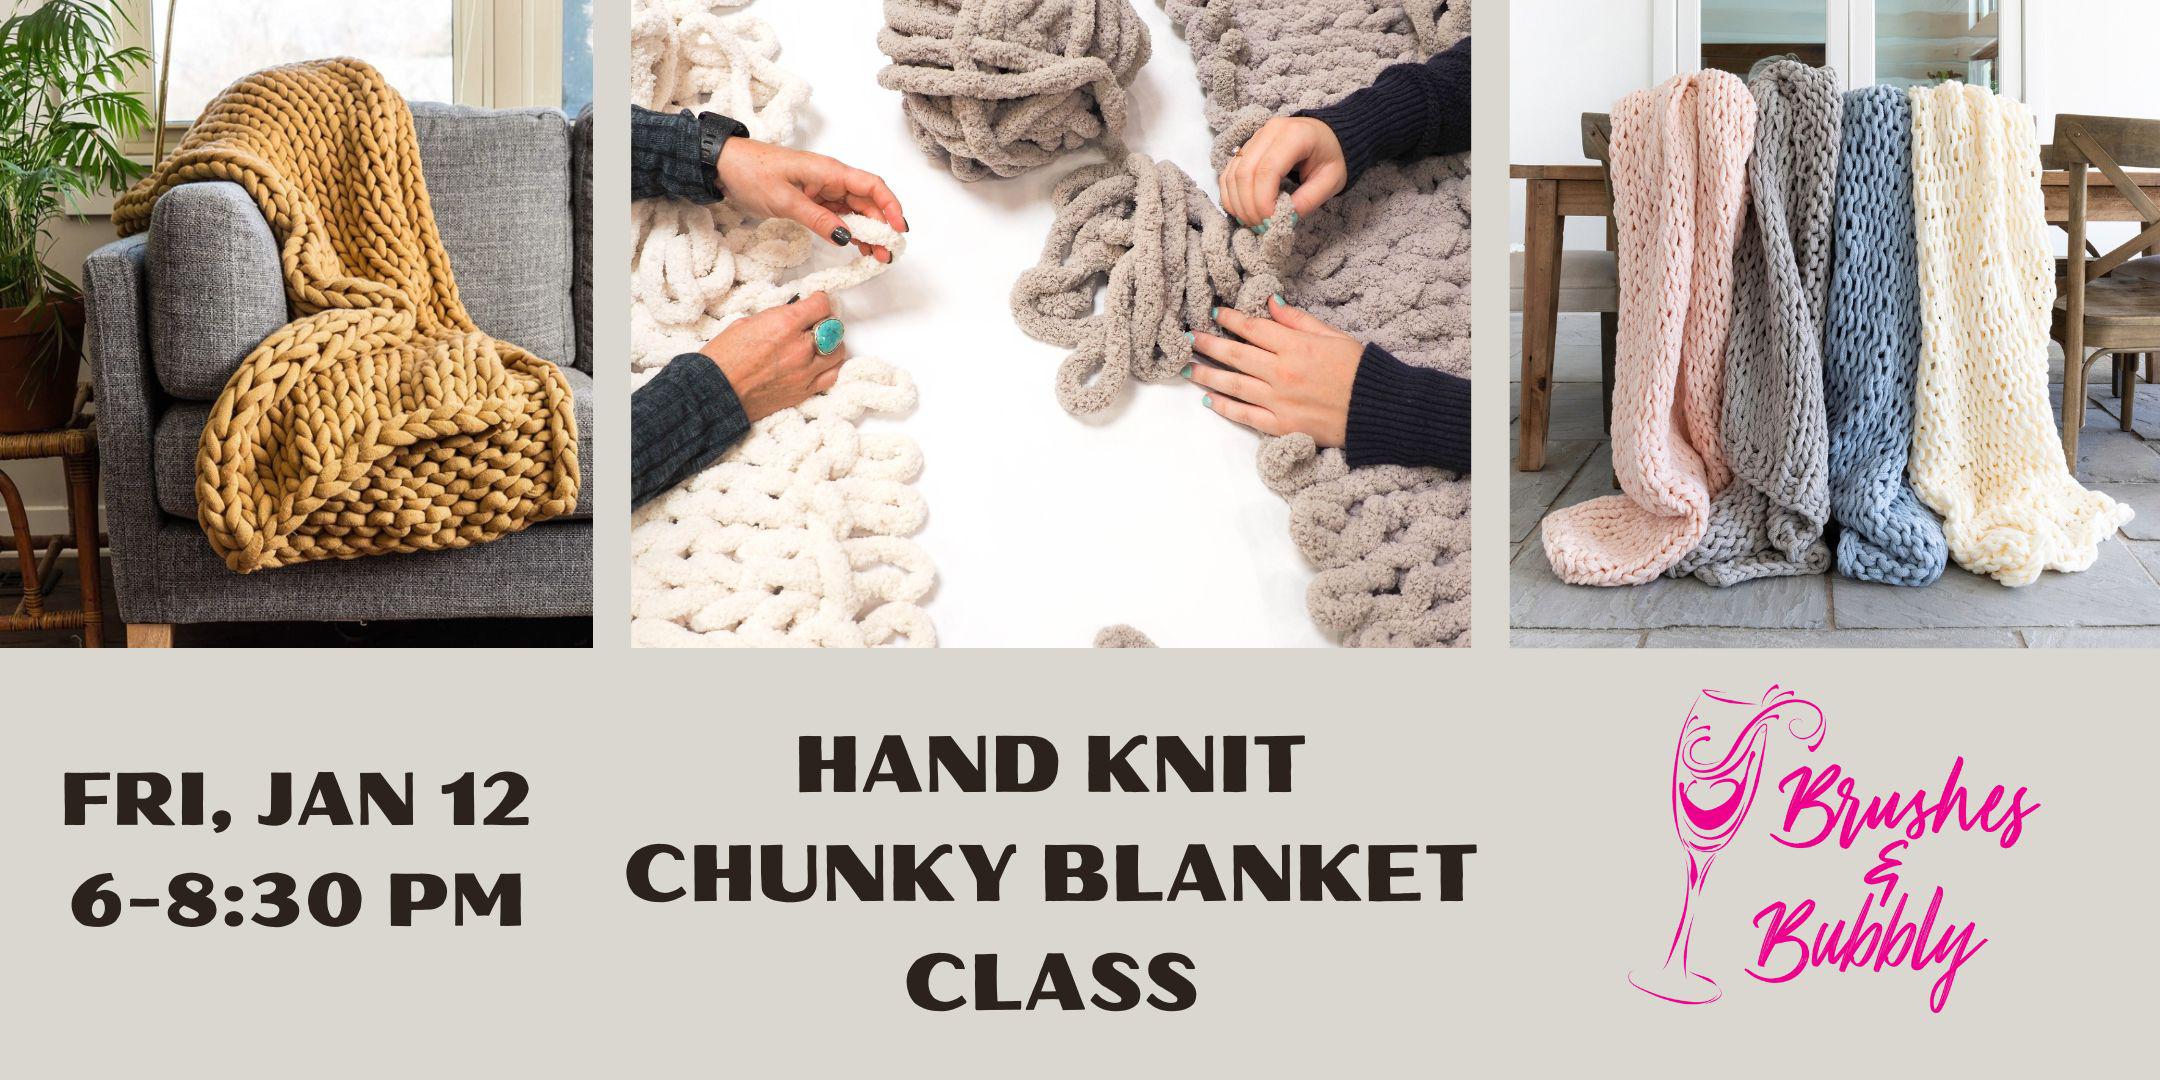 Arm Knit a Chunky Blanket at Home, Online class & kit